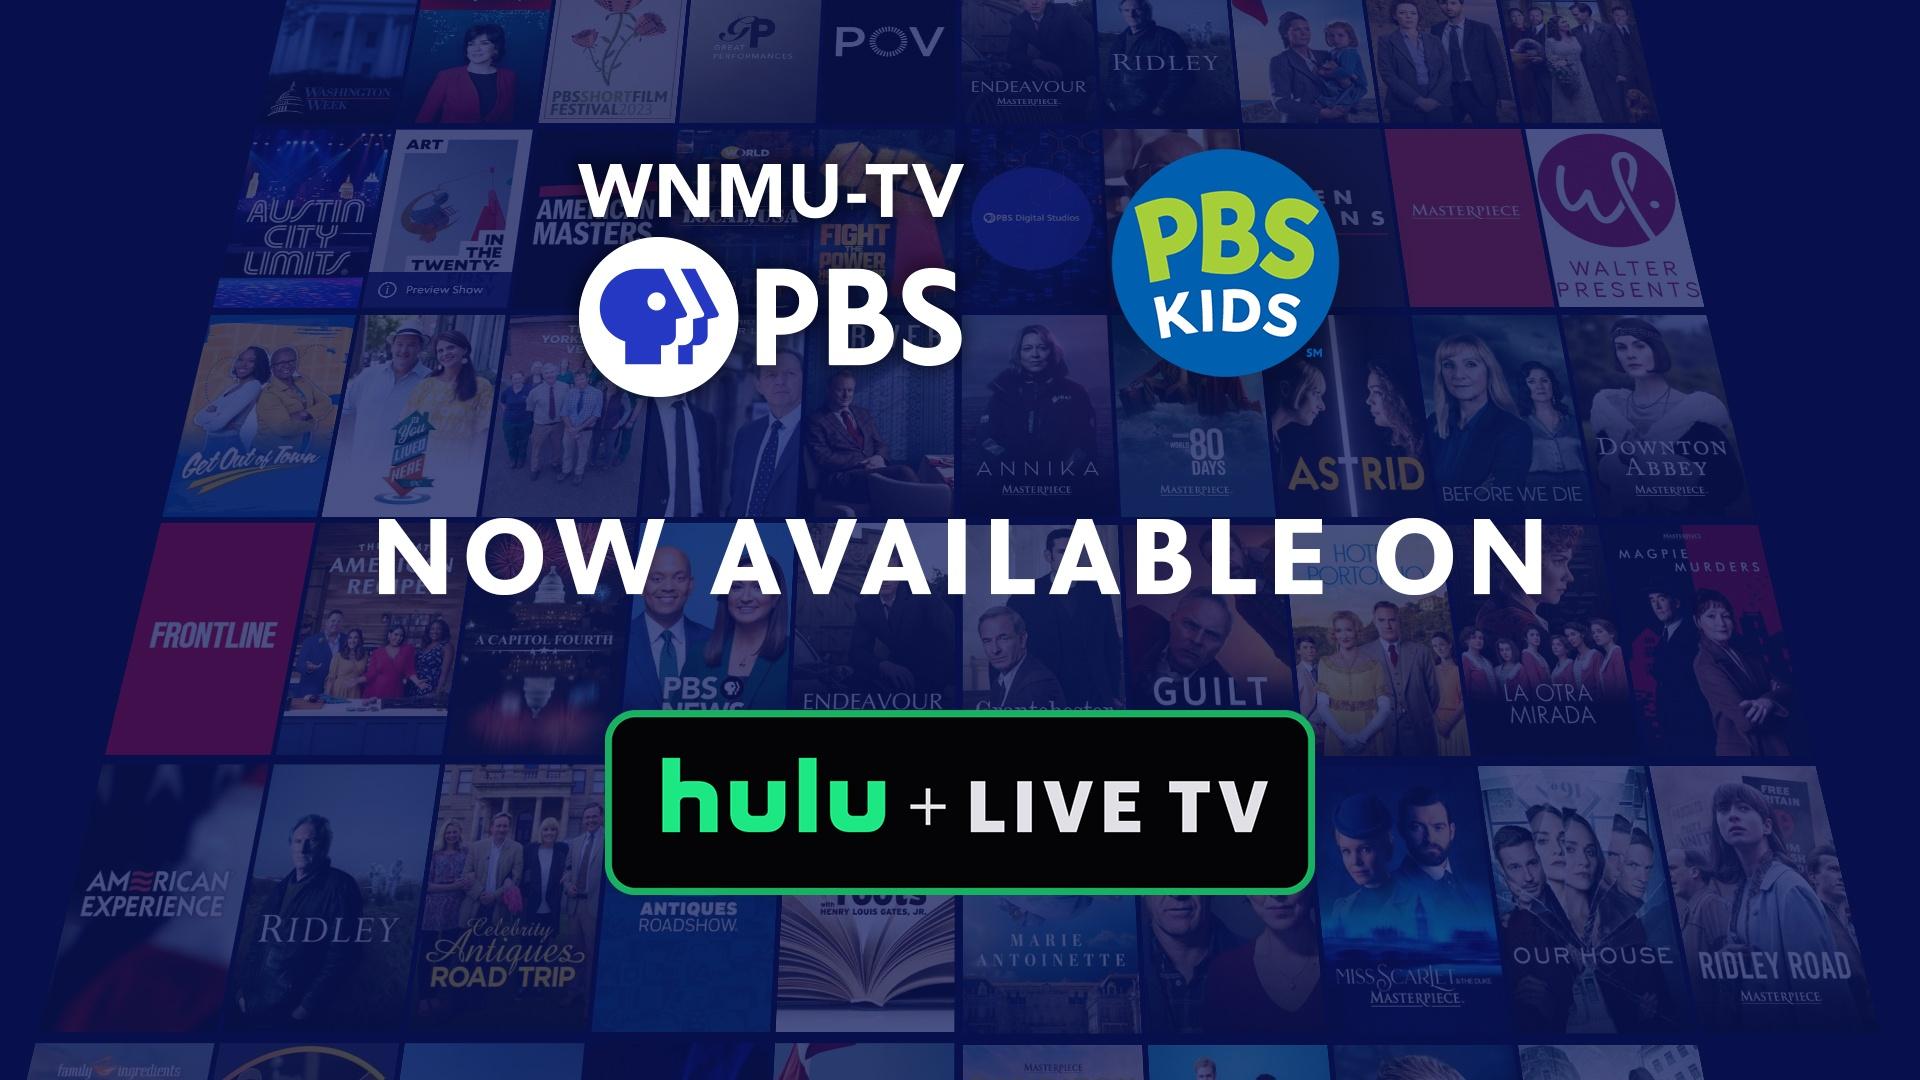 WNMU-TV PBS Now Available to Hulu + Live TV Subscriber